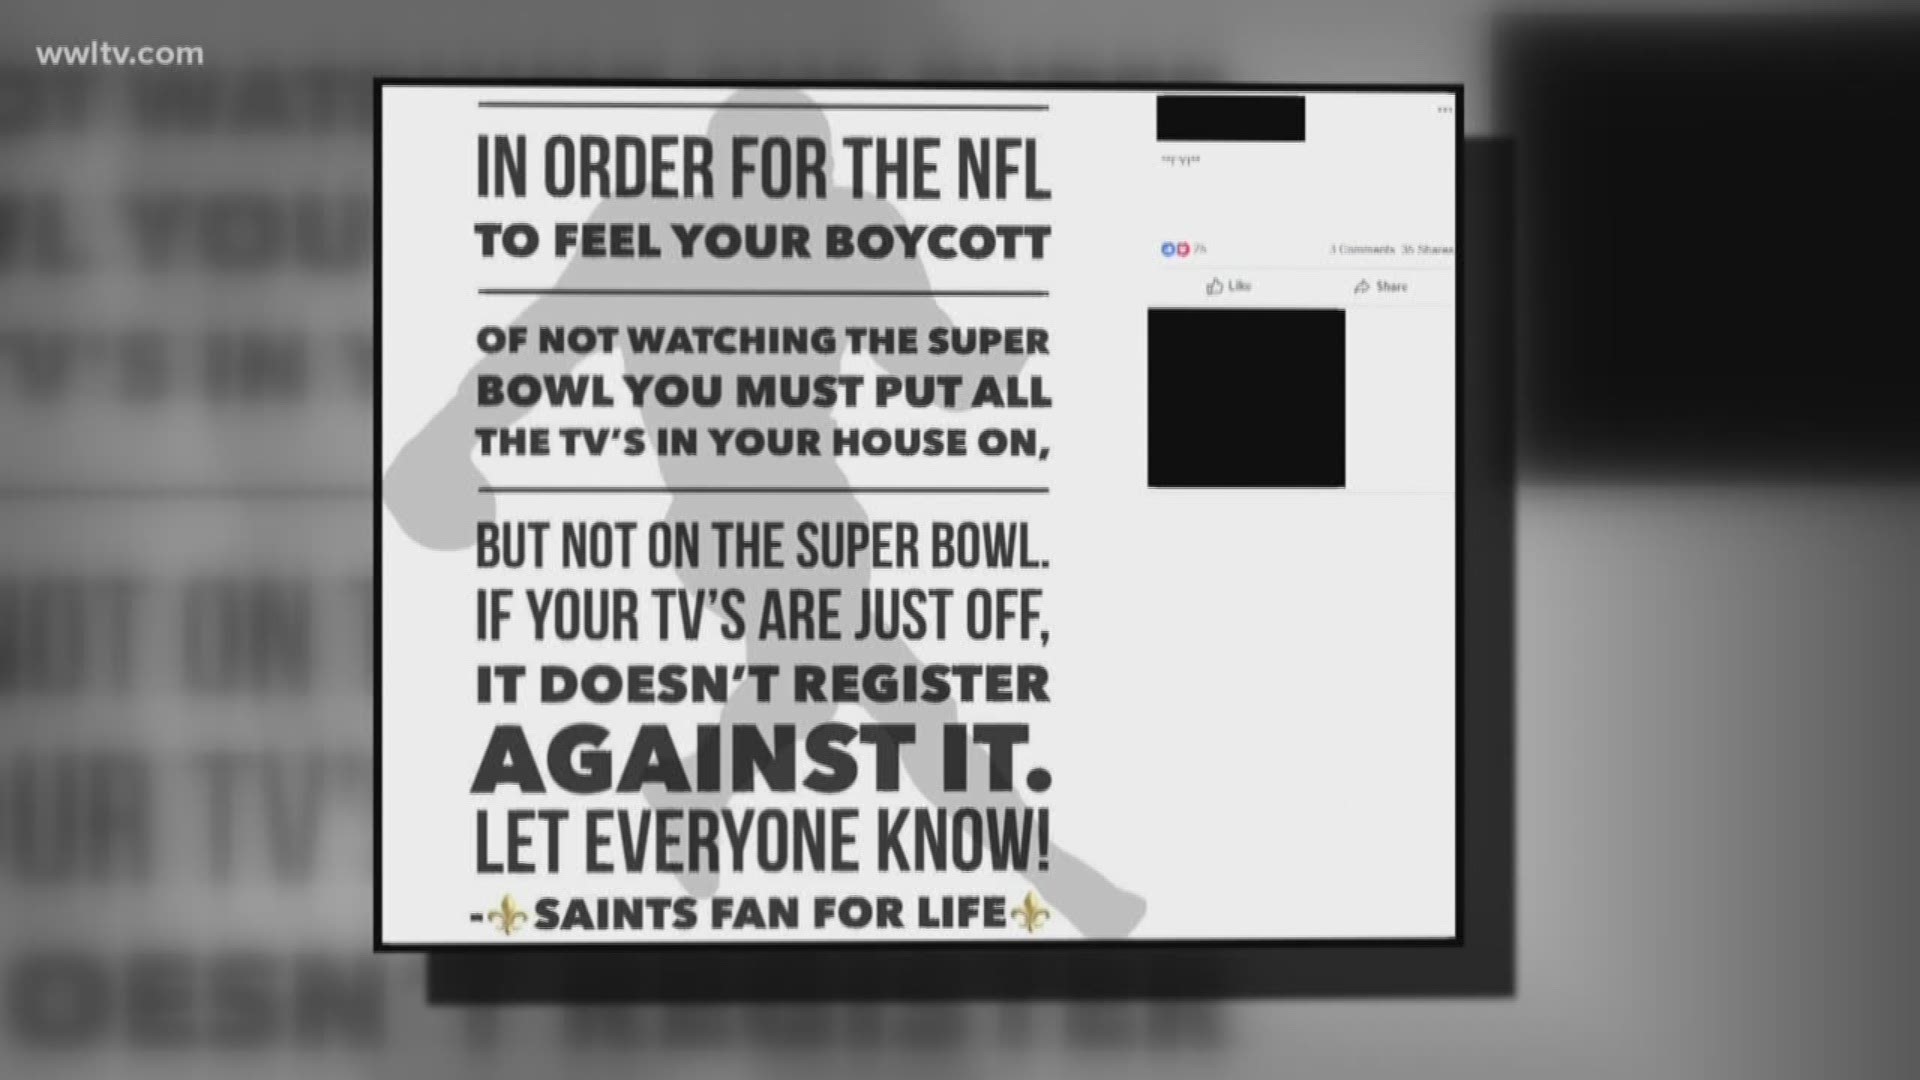 New Orleans is a relatively small market in the Nielsen Ratings system, but there's no scientific way to know where else Saints fans would boycott Super Bowl LIII.